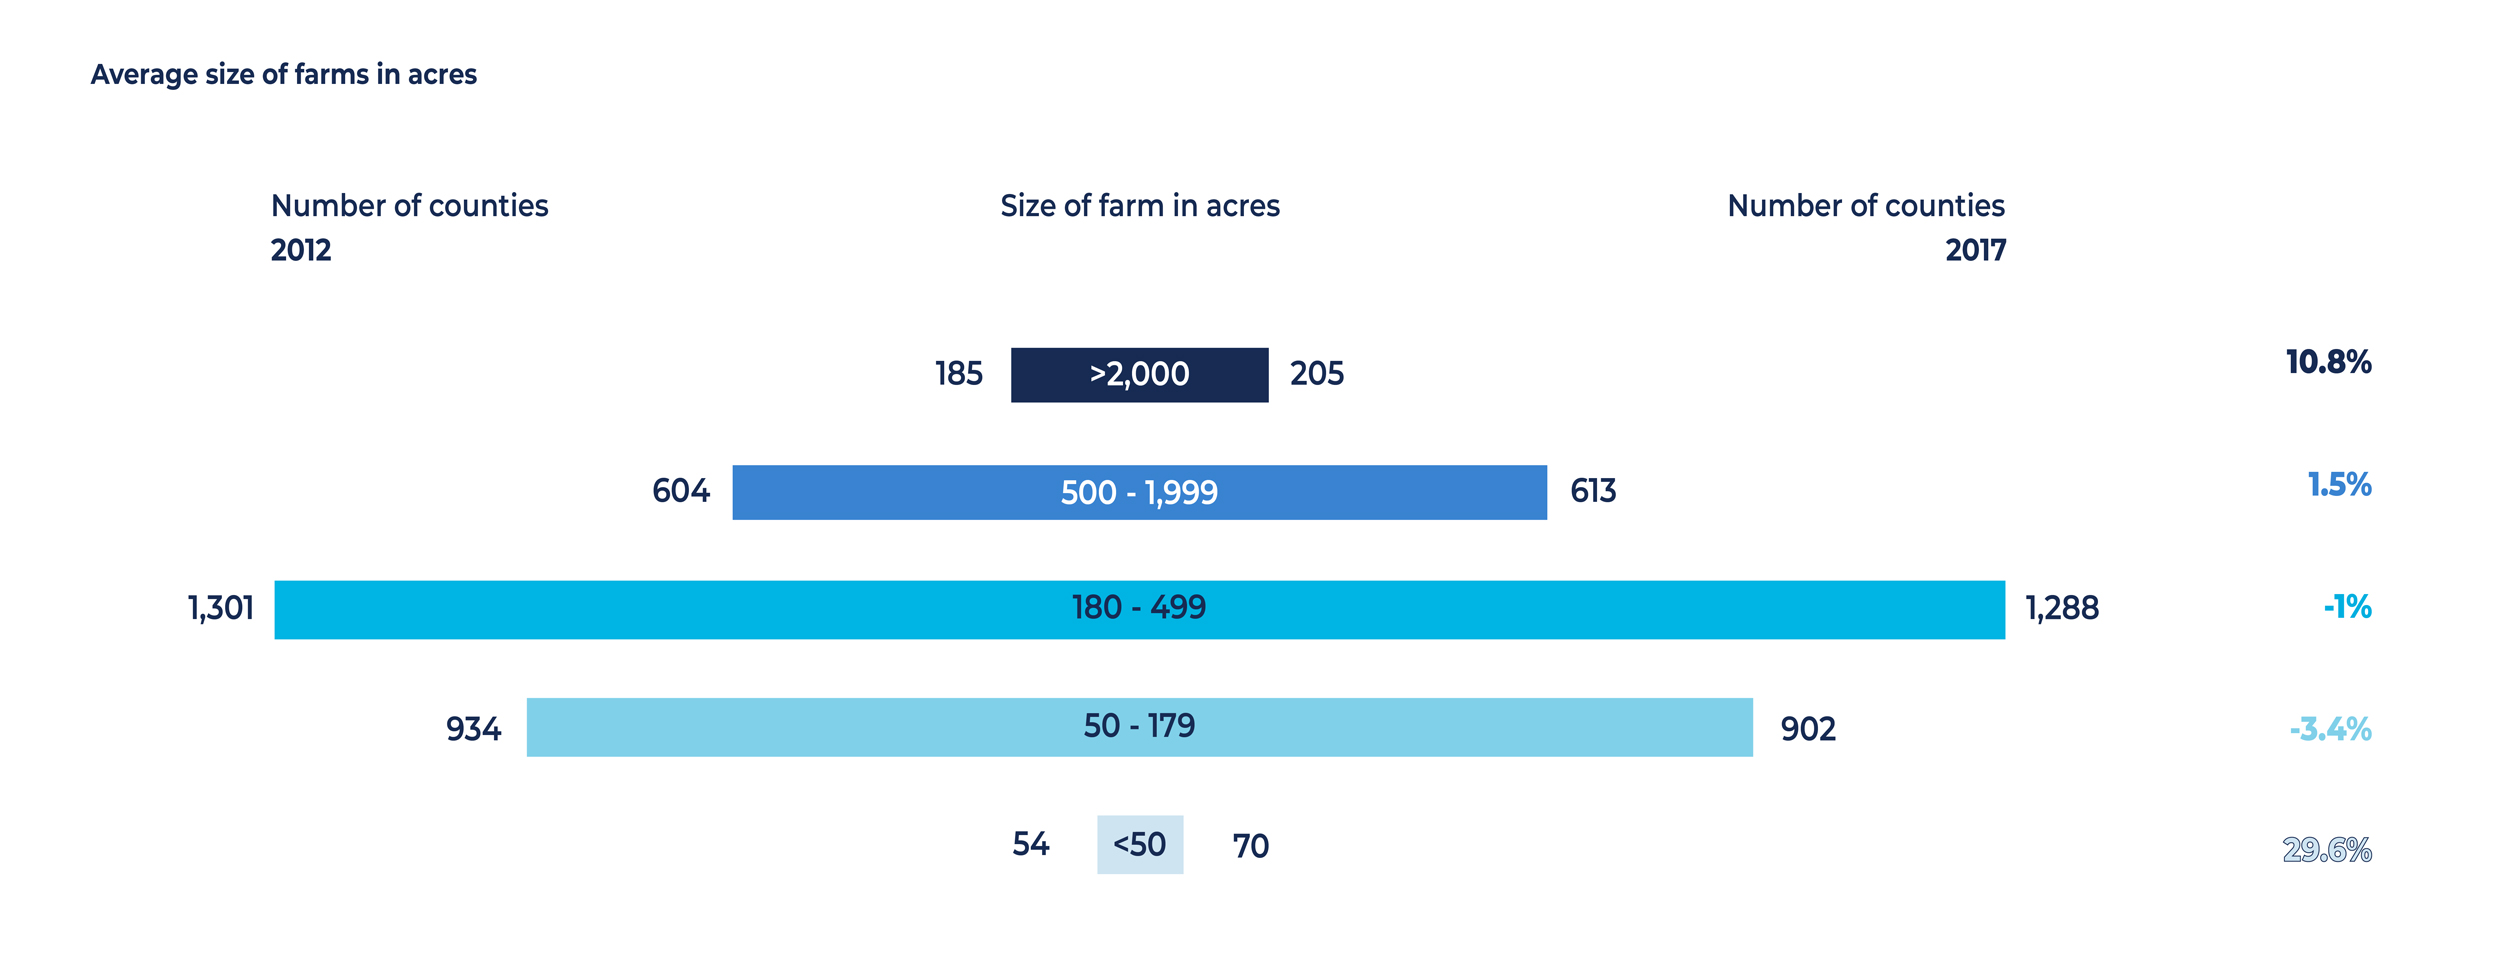 average size farms in acres chart